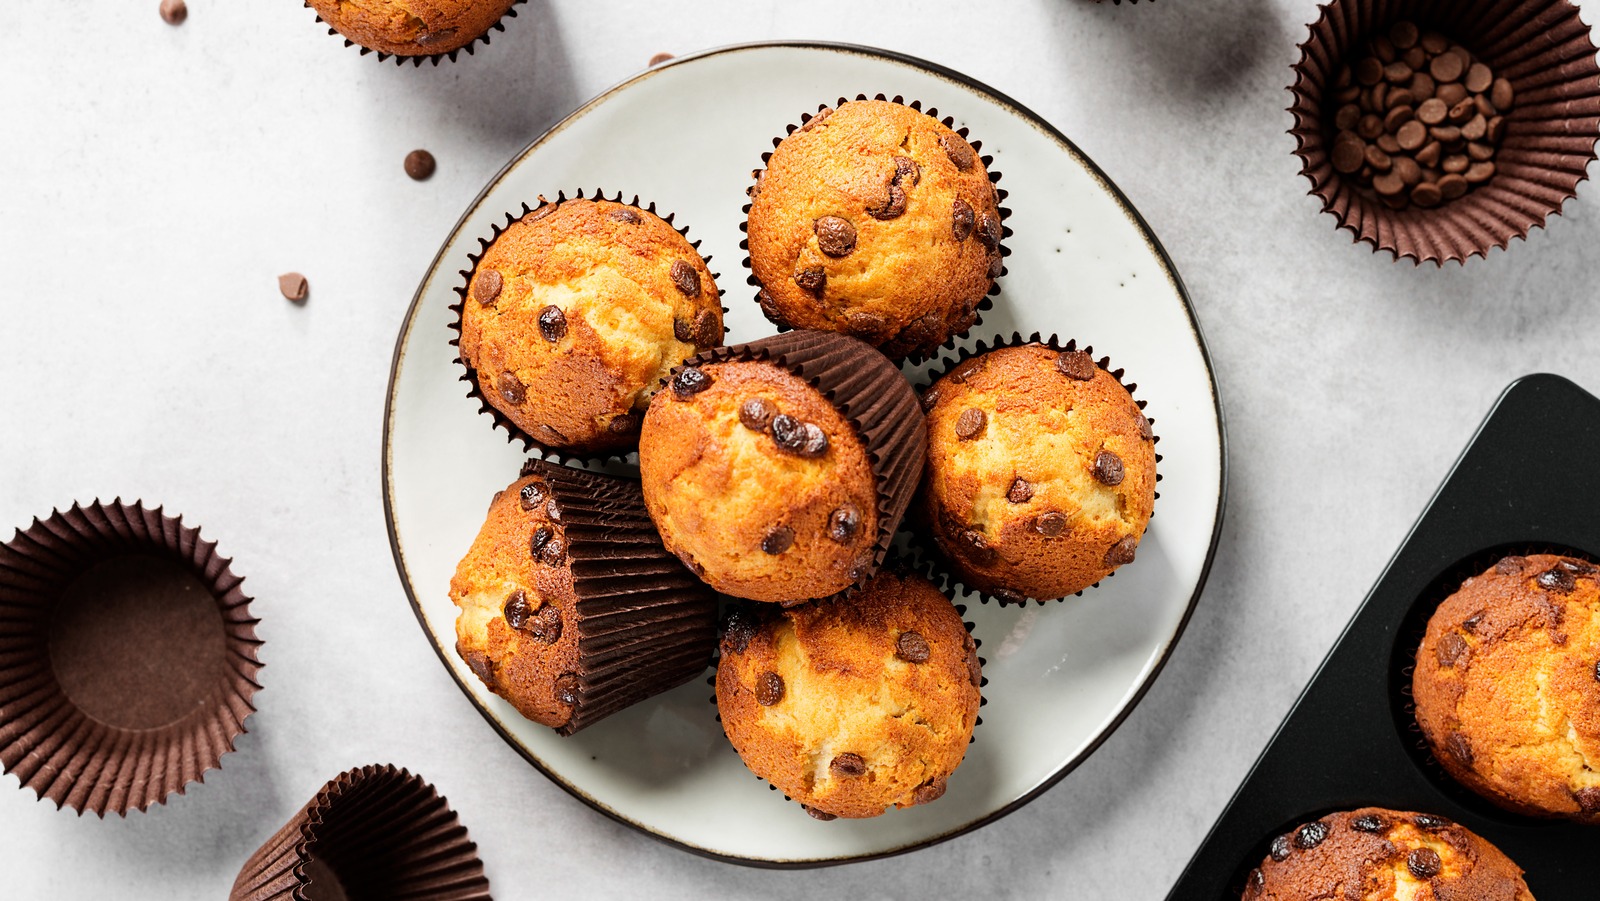 https://www.tastingtable.com/img/gallery/the-absolute-best-ways-to-keep-muffins-fresh/l-intro-1655469600.jpg